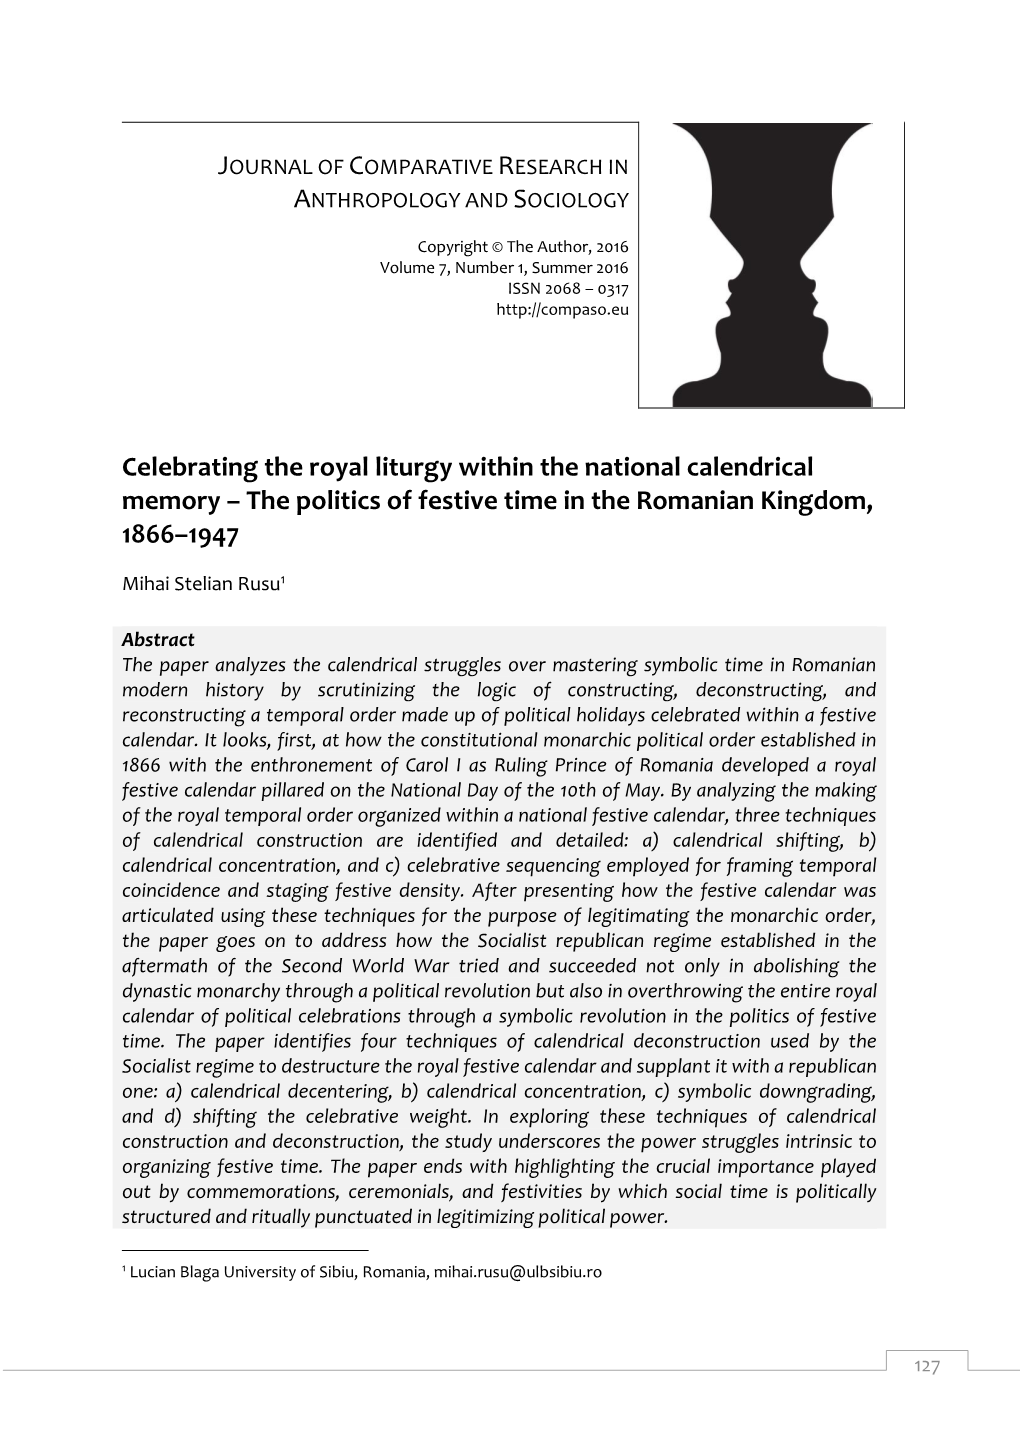 Celebrating the Royal Liturgy Within the National Calendrical Memory – the Politics of Festive Time in the Romanian Kingdom, 1866–1947